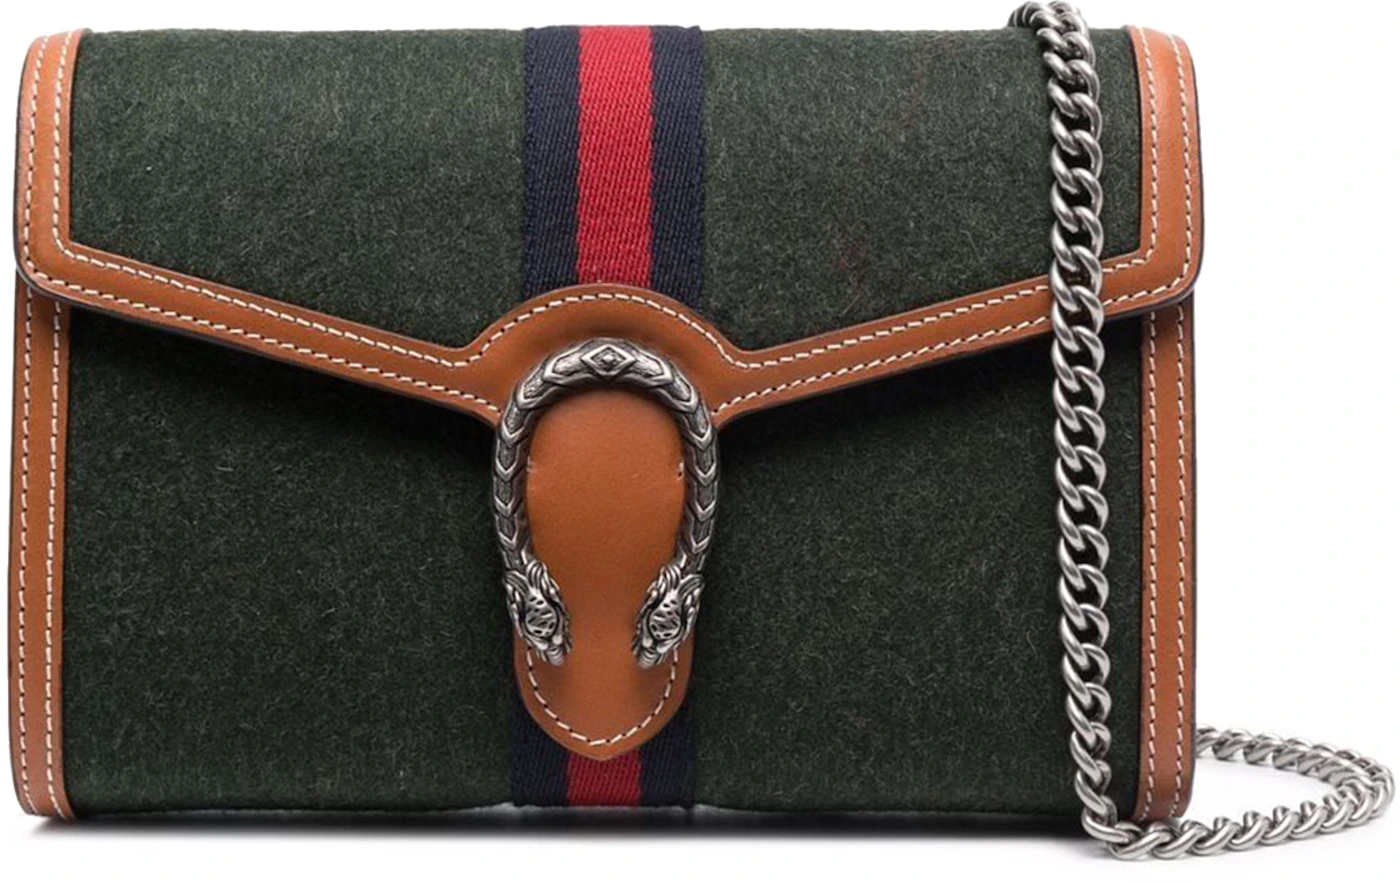 Green Leather Dionysus Wallet on Chain (WOC)